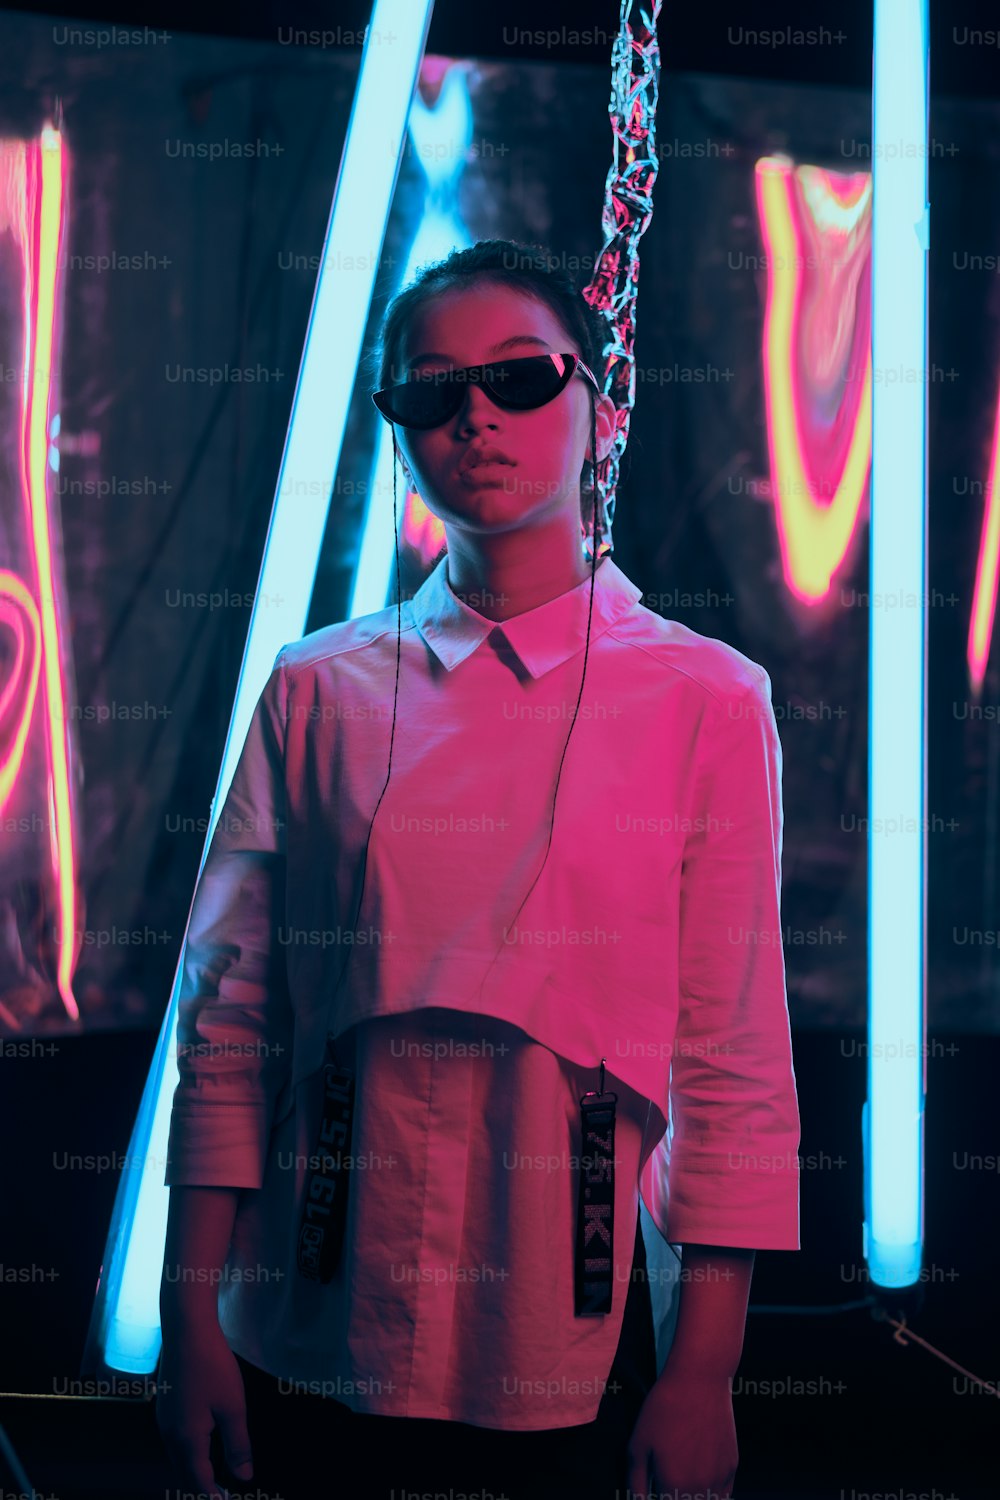 Portrait of young asian teenage girl in stylish crescent shaped sun glasses, in red anf blue neon light. Cyber, futuristic portrait concept